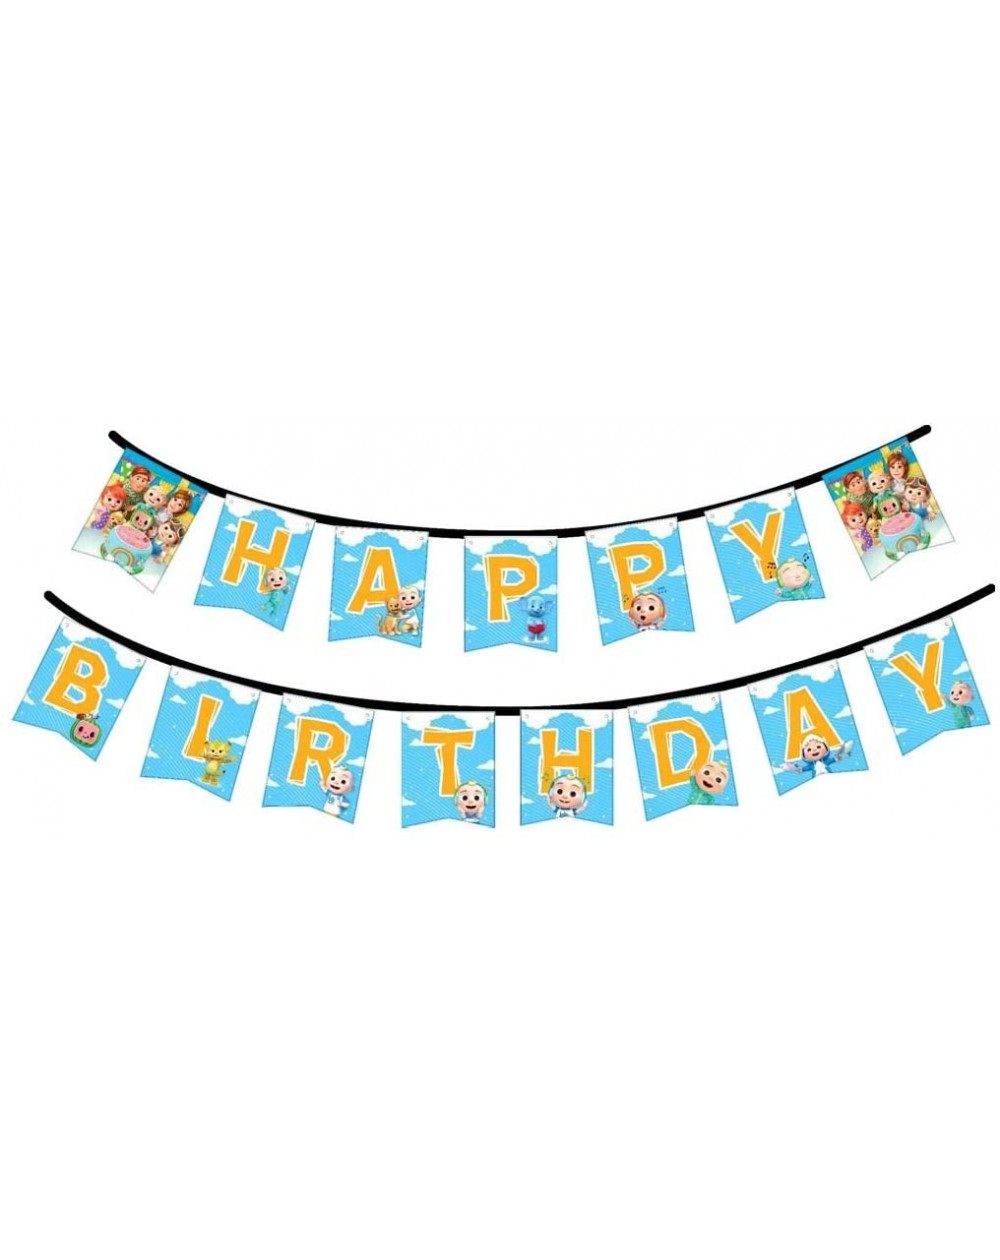 Cocomelon Hanging Swirls with Banner Party Supplies Decorations for ...